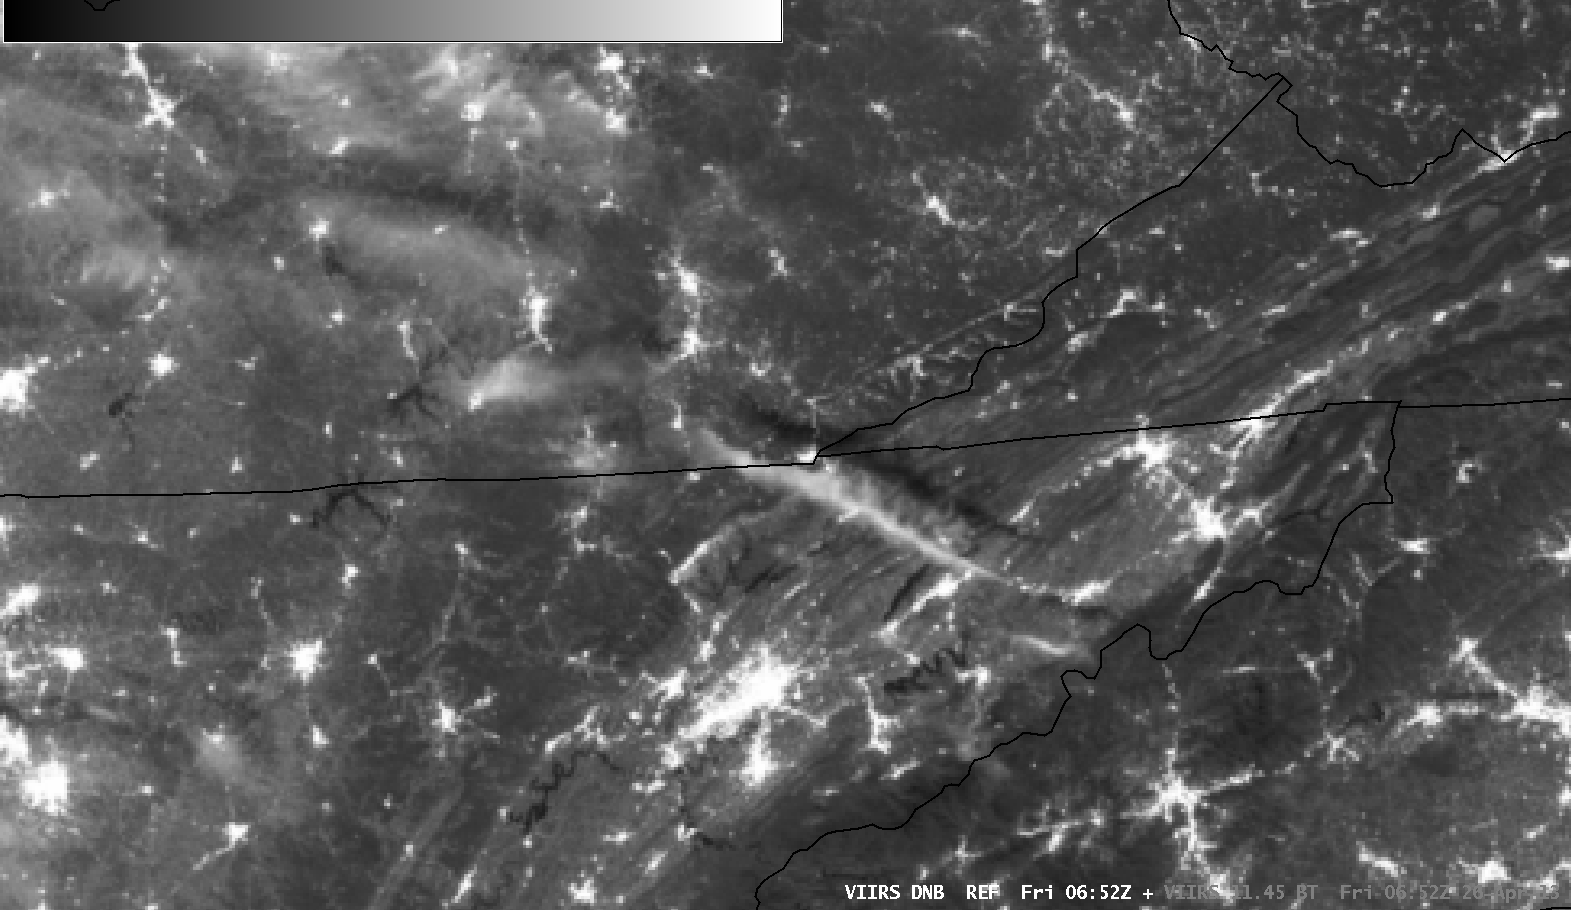 Suomi NPP VIIRS 0.7 Âµm Day/Night Band  and 11.45 Âµm IR channel images